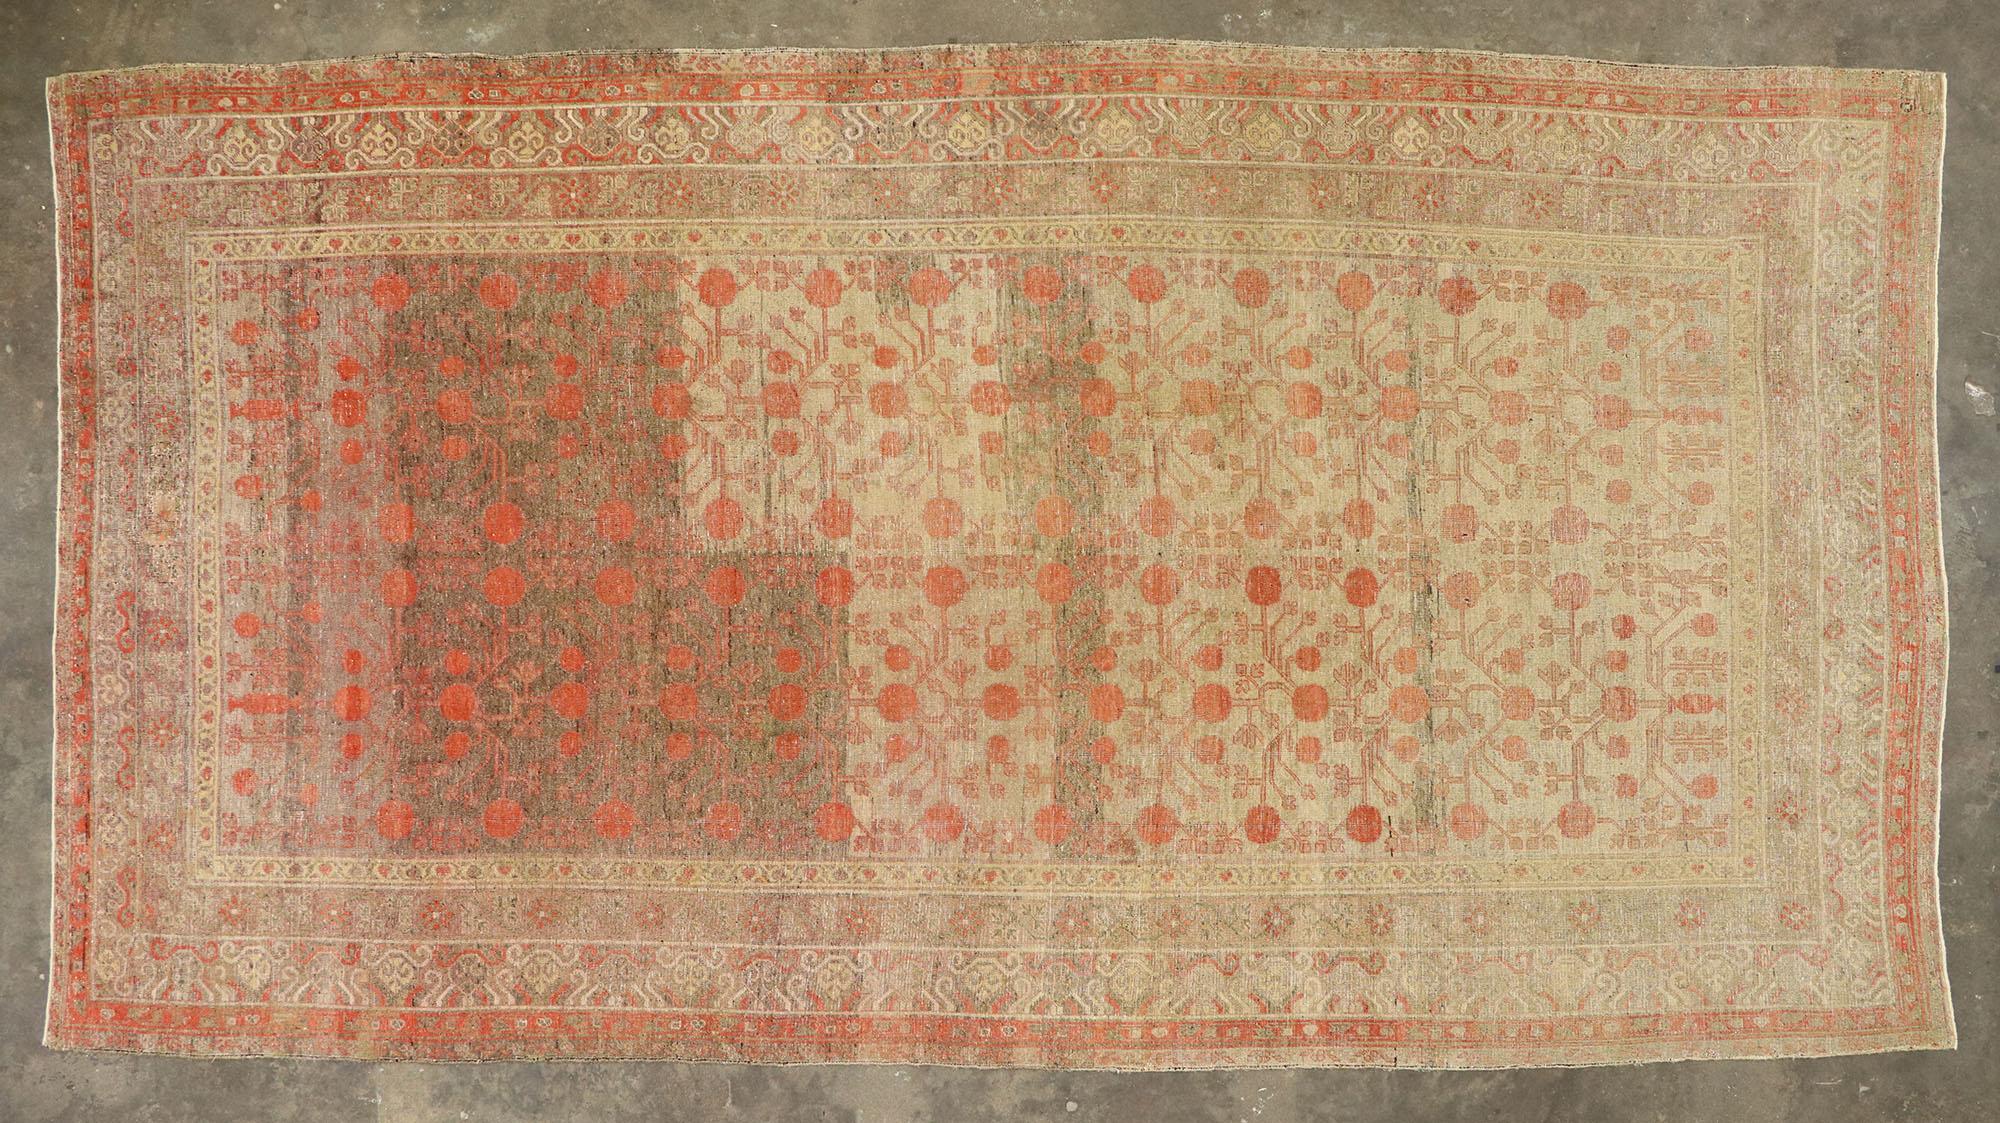 Distressed Antique Khotan Gallery Rug with Pomegranate Design For Sale 1